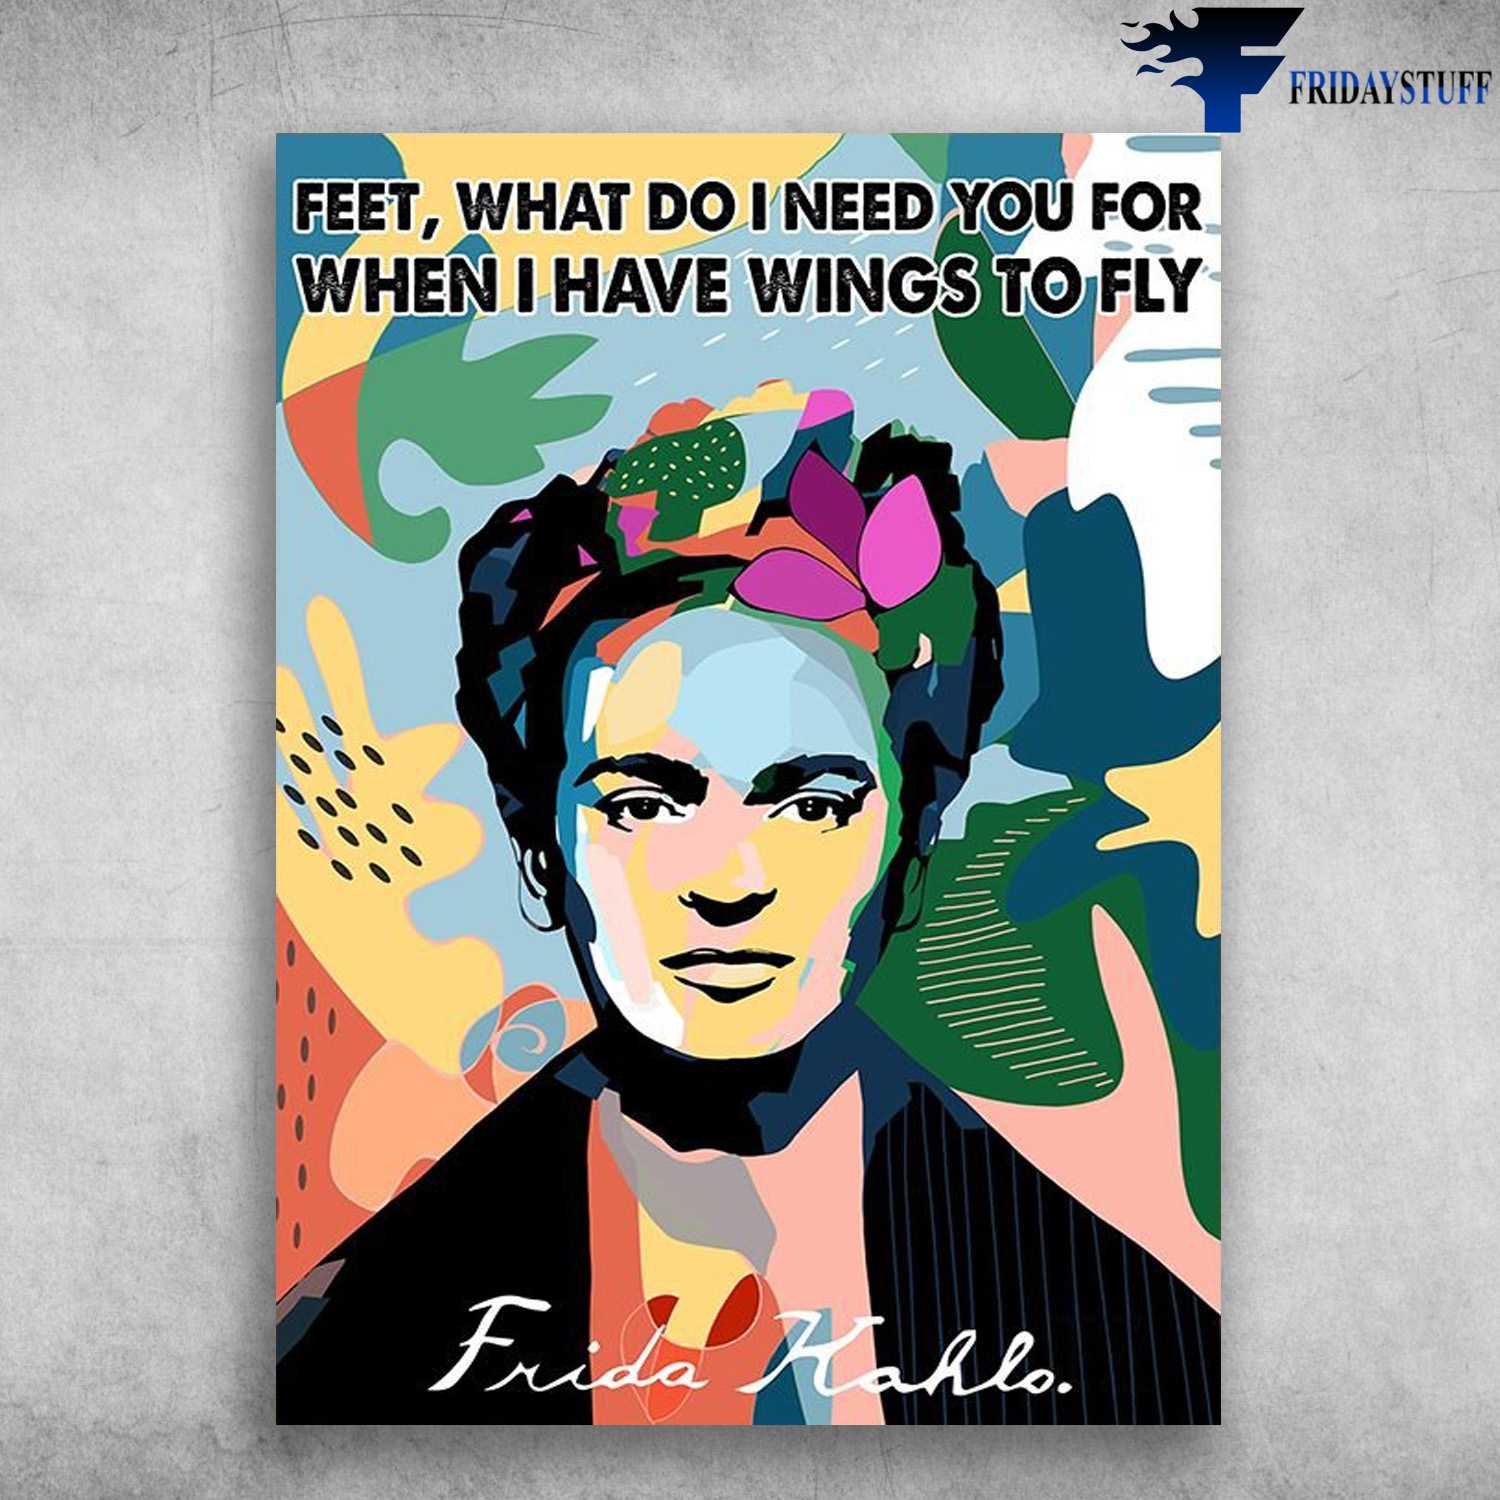 Frida Kahlo - Feet What Do I Need You For, When I Have Wings To Fly